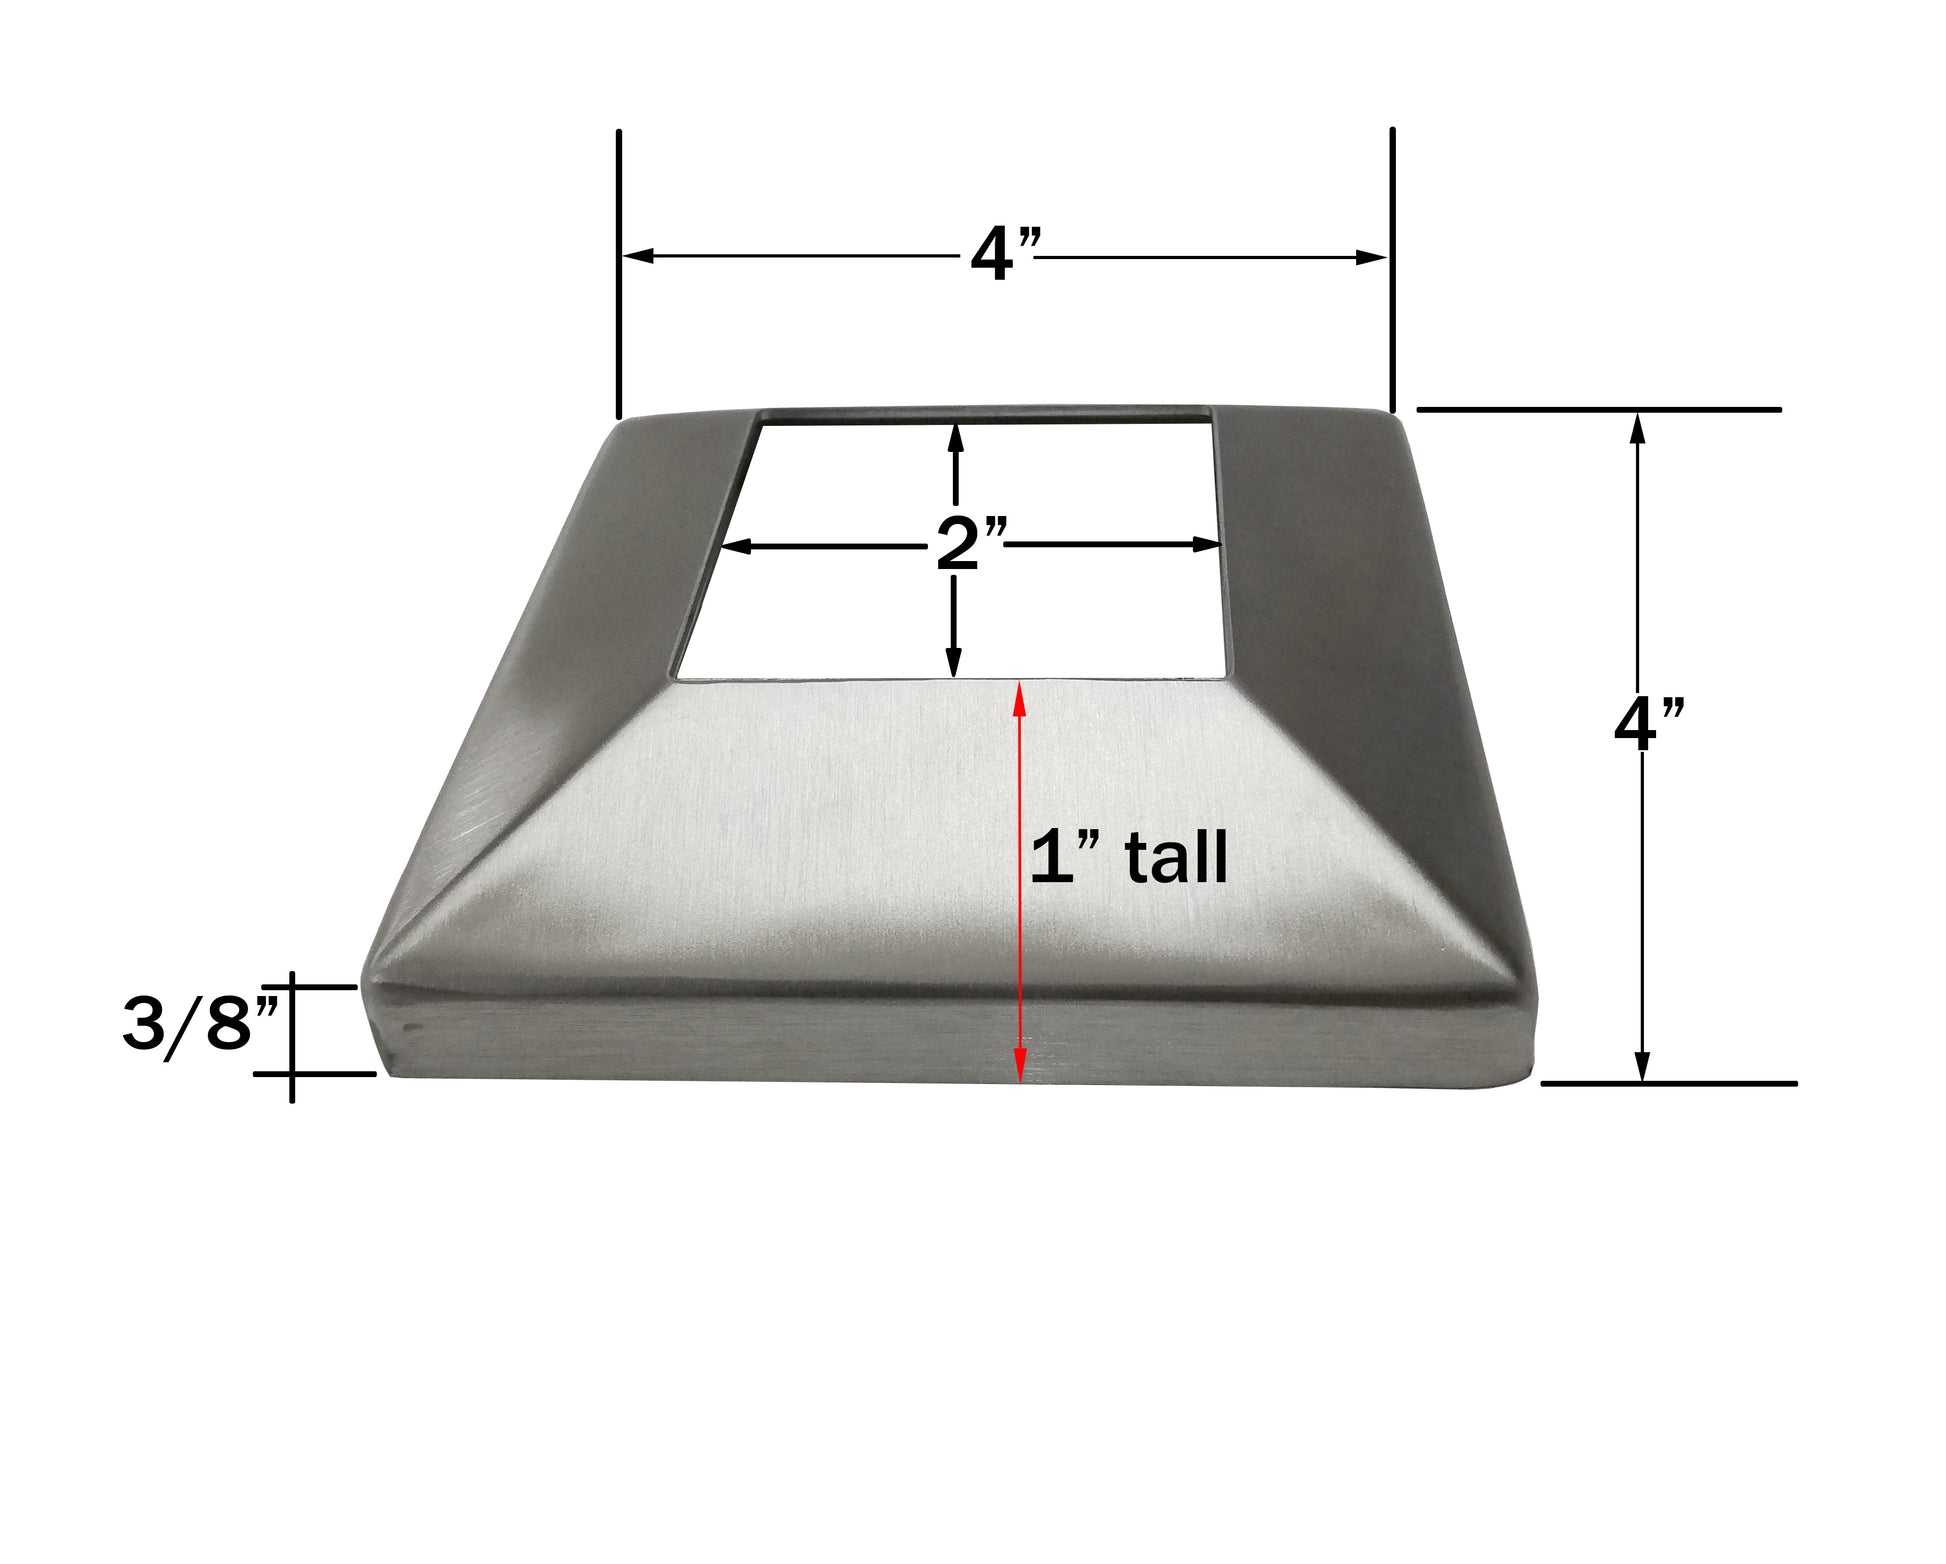 Stainless Steel 316 Grade Square Base Cover and Plate for 2" Post Fitting (C1060-200) - SHEMONICO